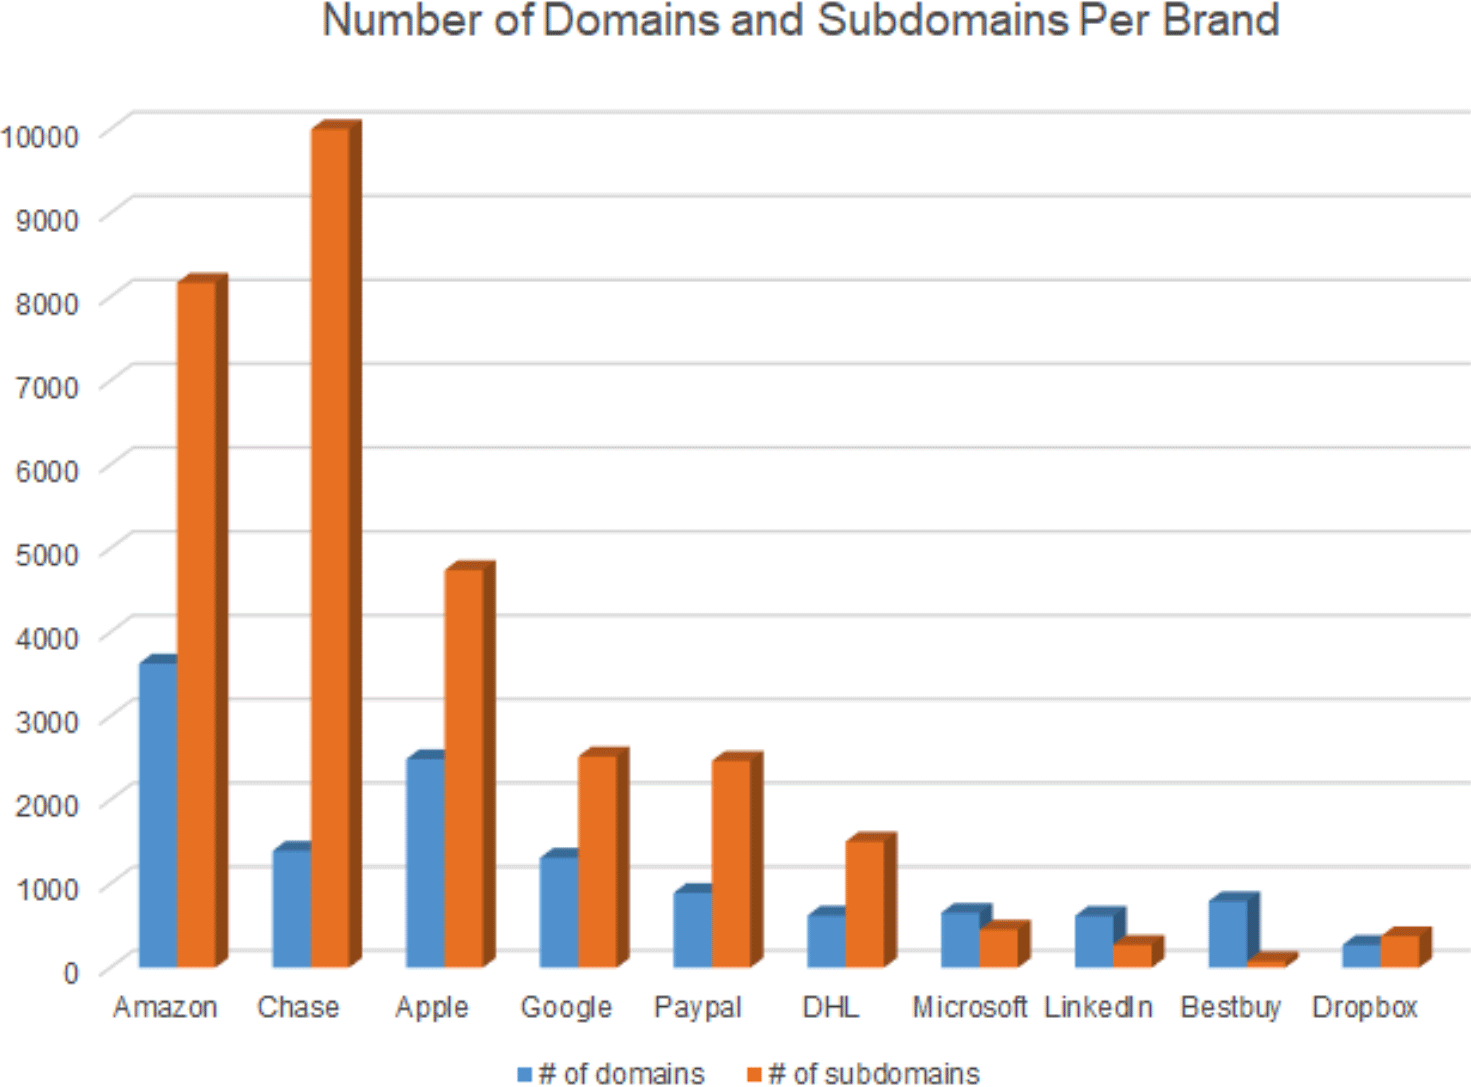 Q2 2021 Top 10 Most Impersonated Brands in Domains 51